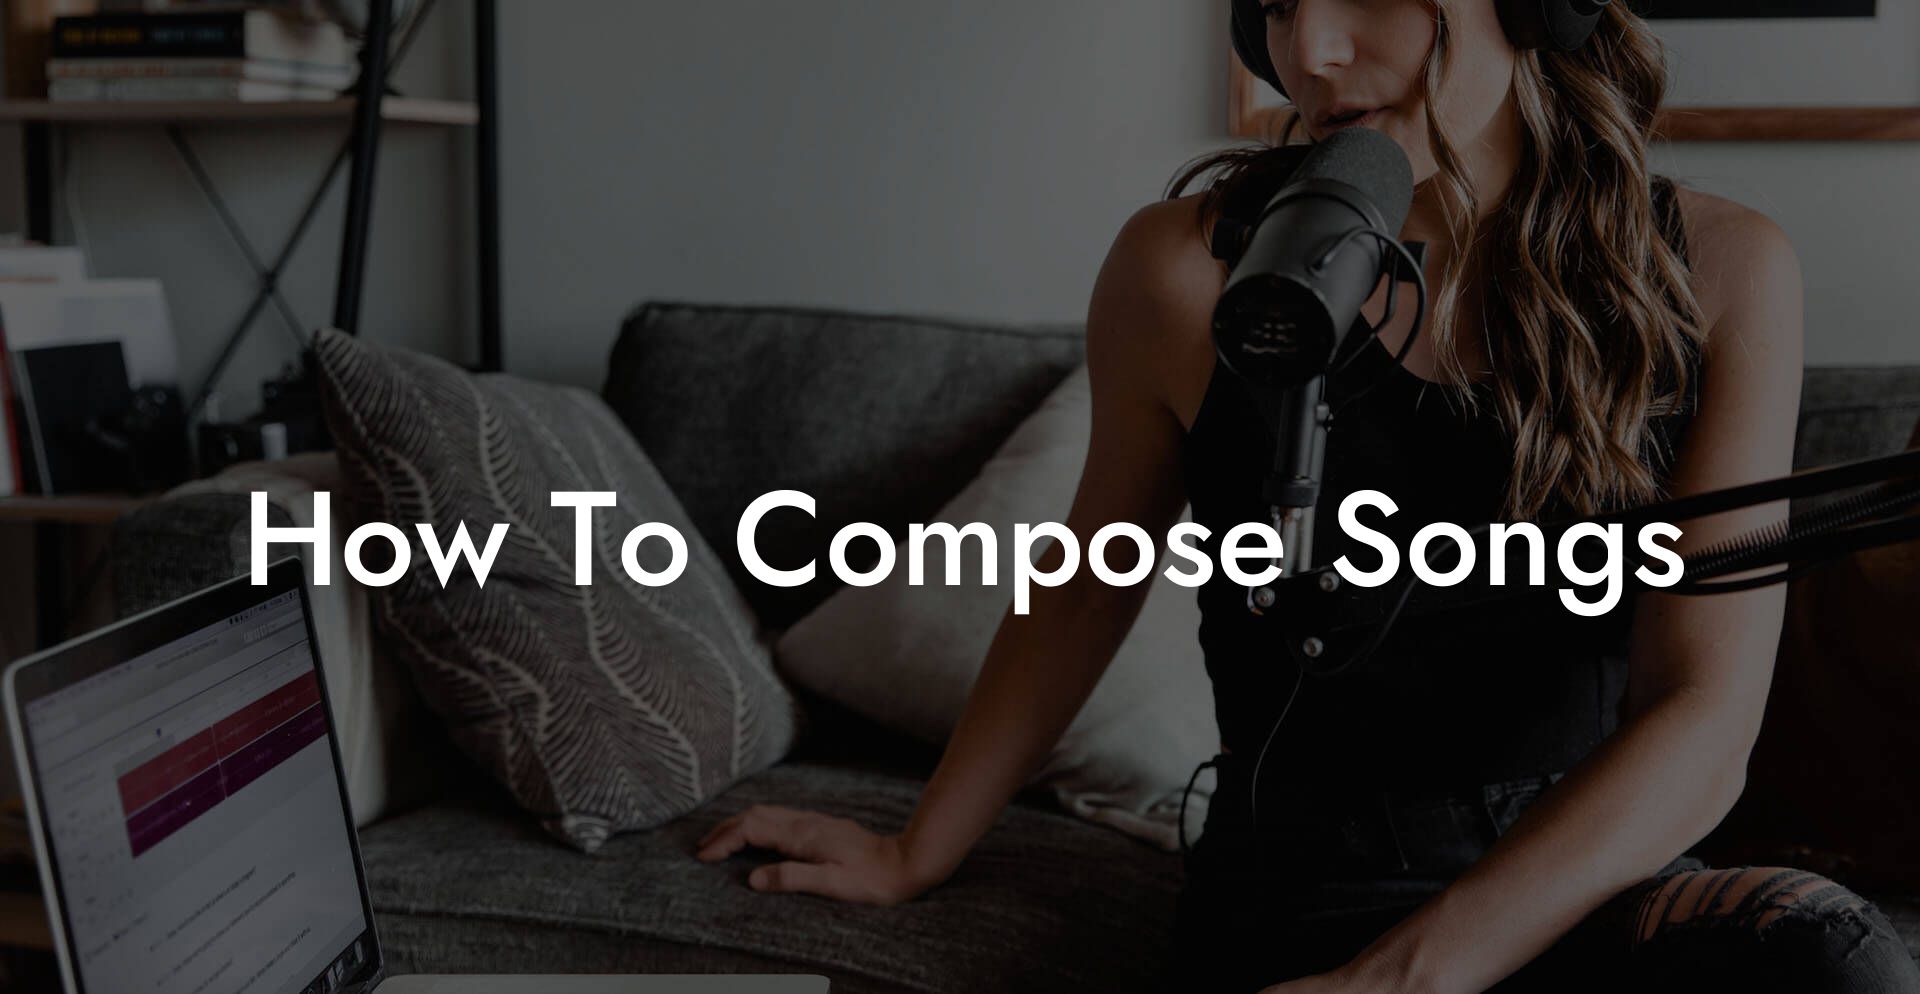 how to compose songs lyric assistant